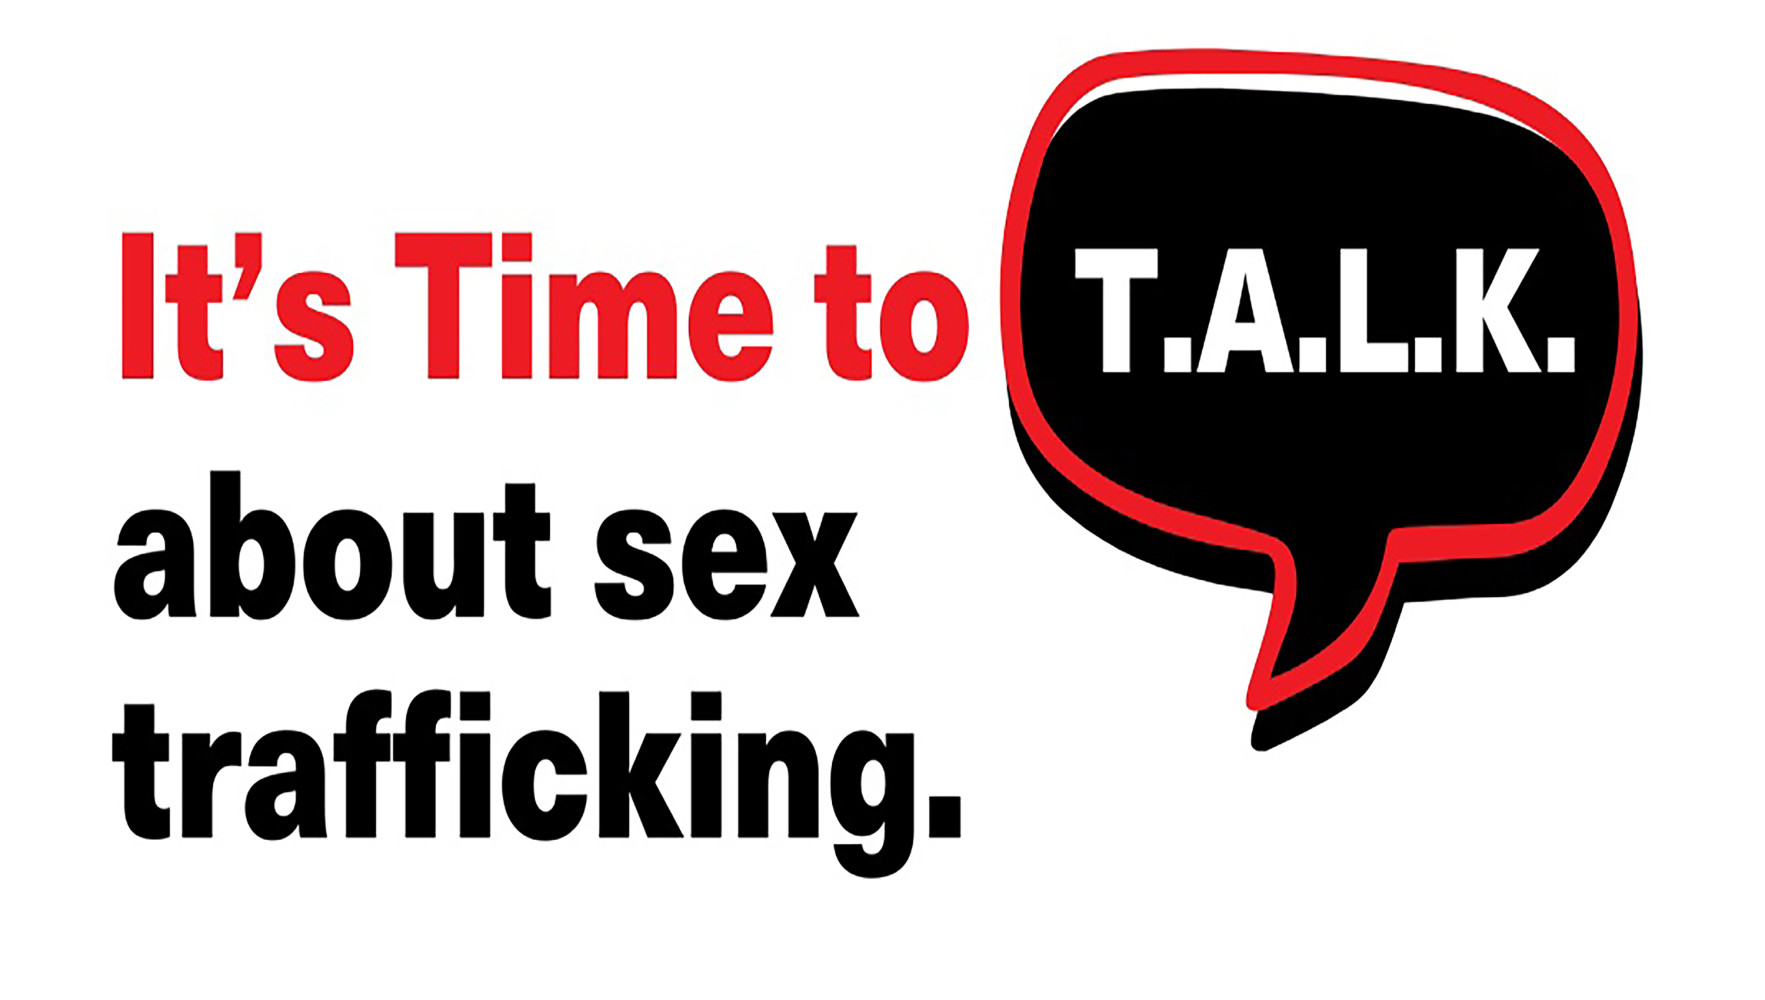 It’s Human Trafficking Awareness Day, so let’s talk about it  